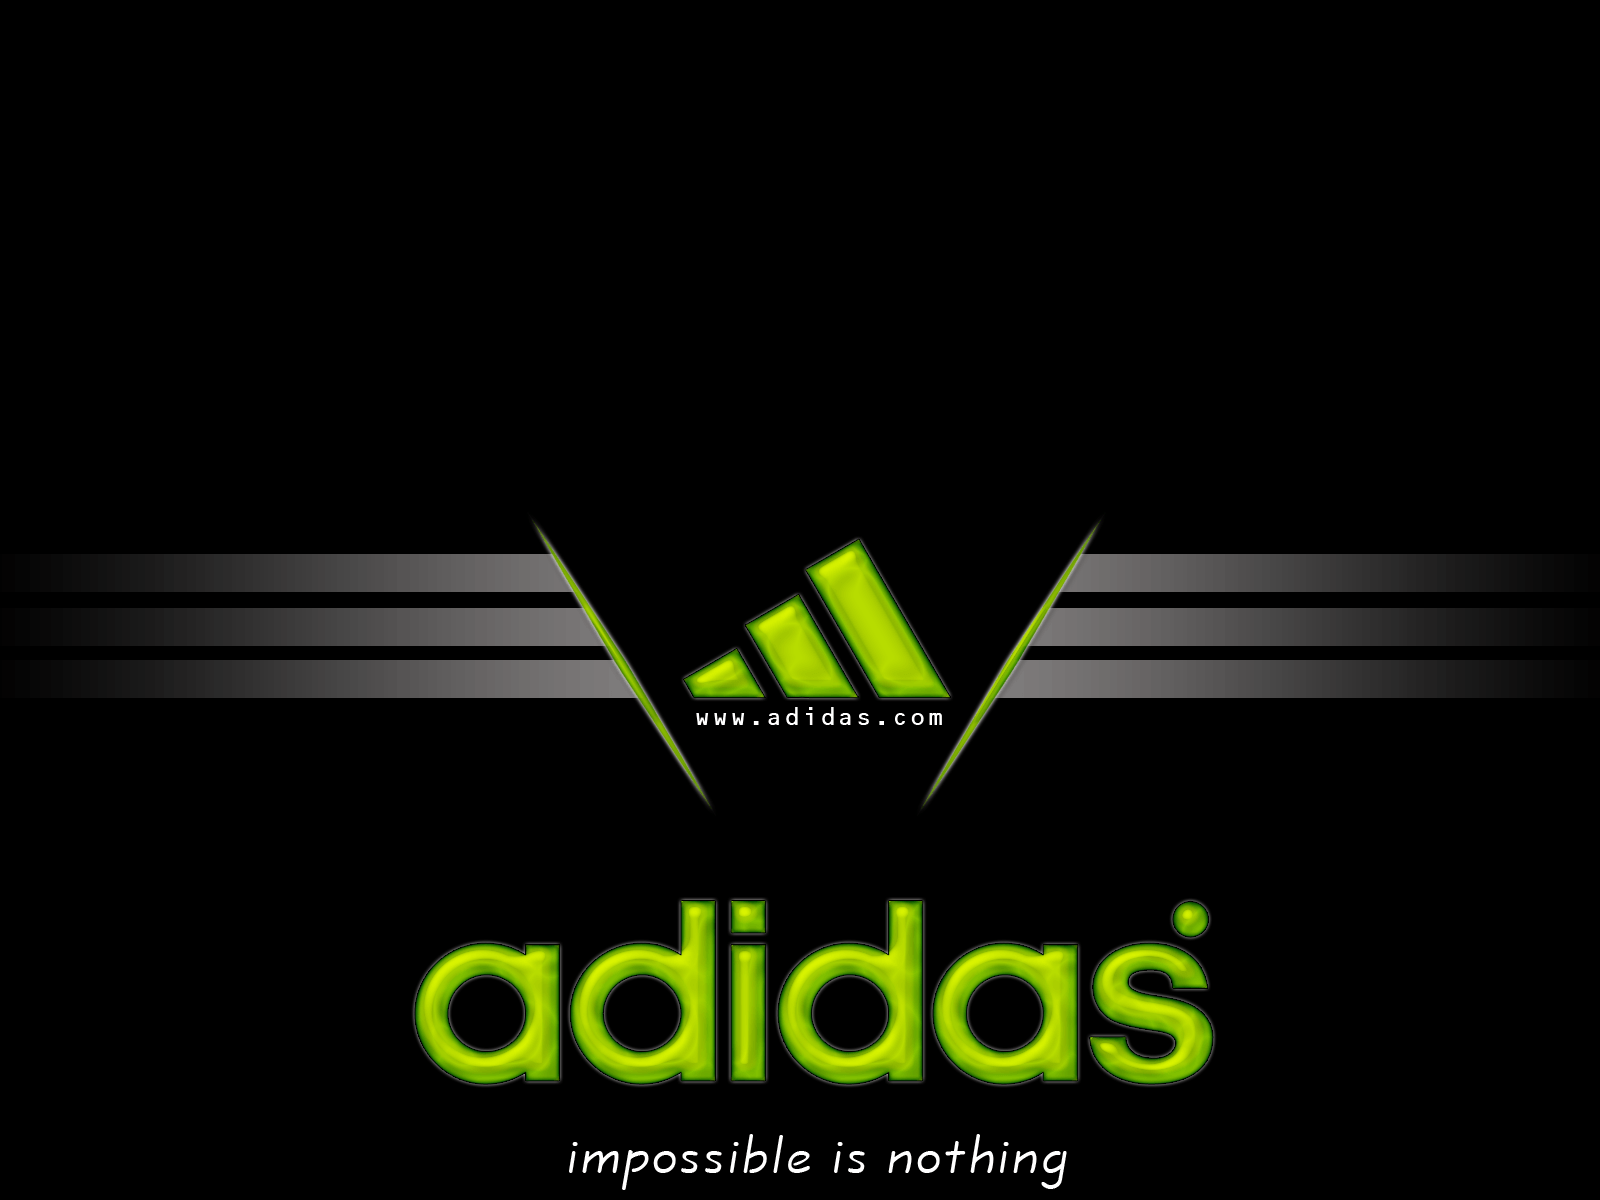 Red And Black Adidas Logo Wallpapers